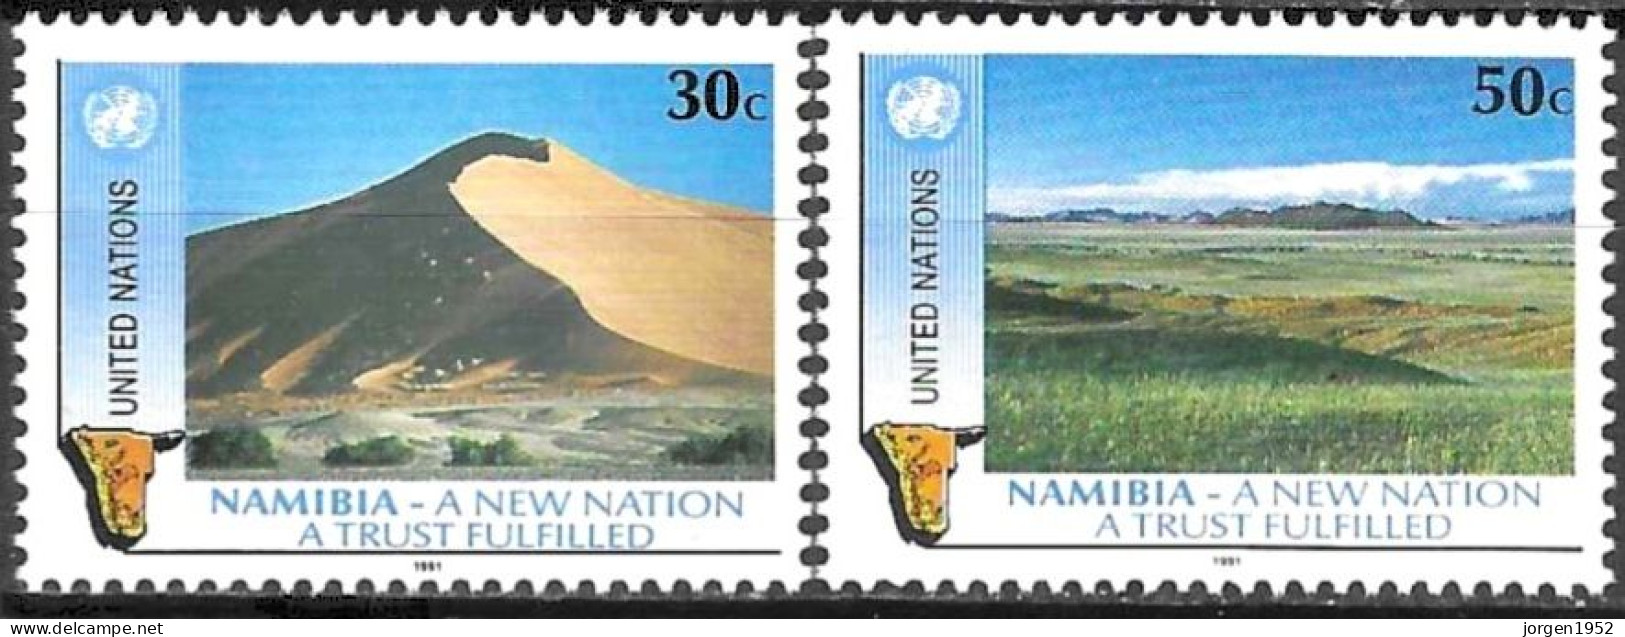 UNITED NATIONS # NEW YORK FROM 1991 STAMPWORLD 612-13** - Unused Stamps